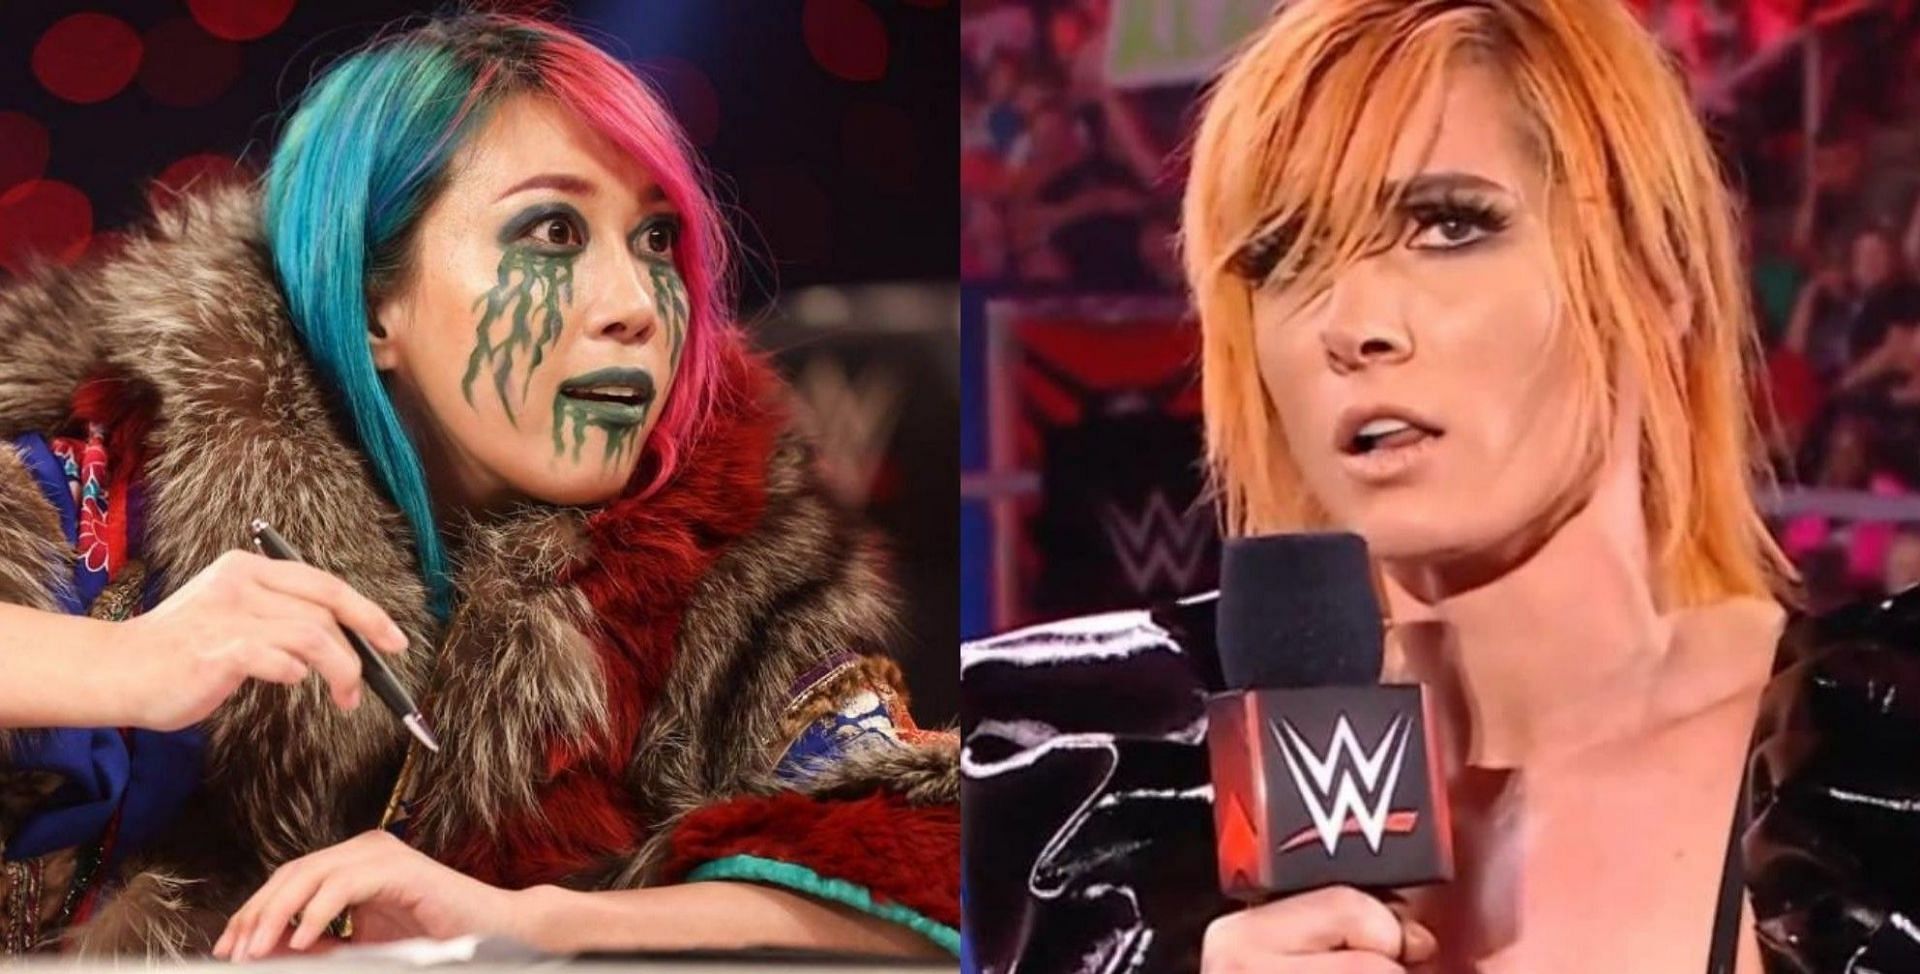 Becky Lynch and Asuka&#039;s feud has seemingly hit new heights